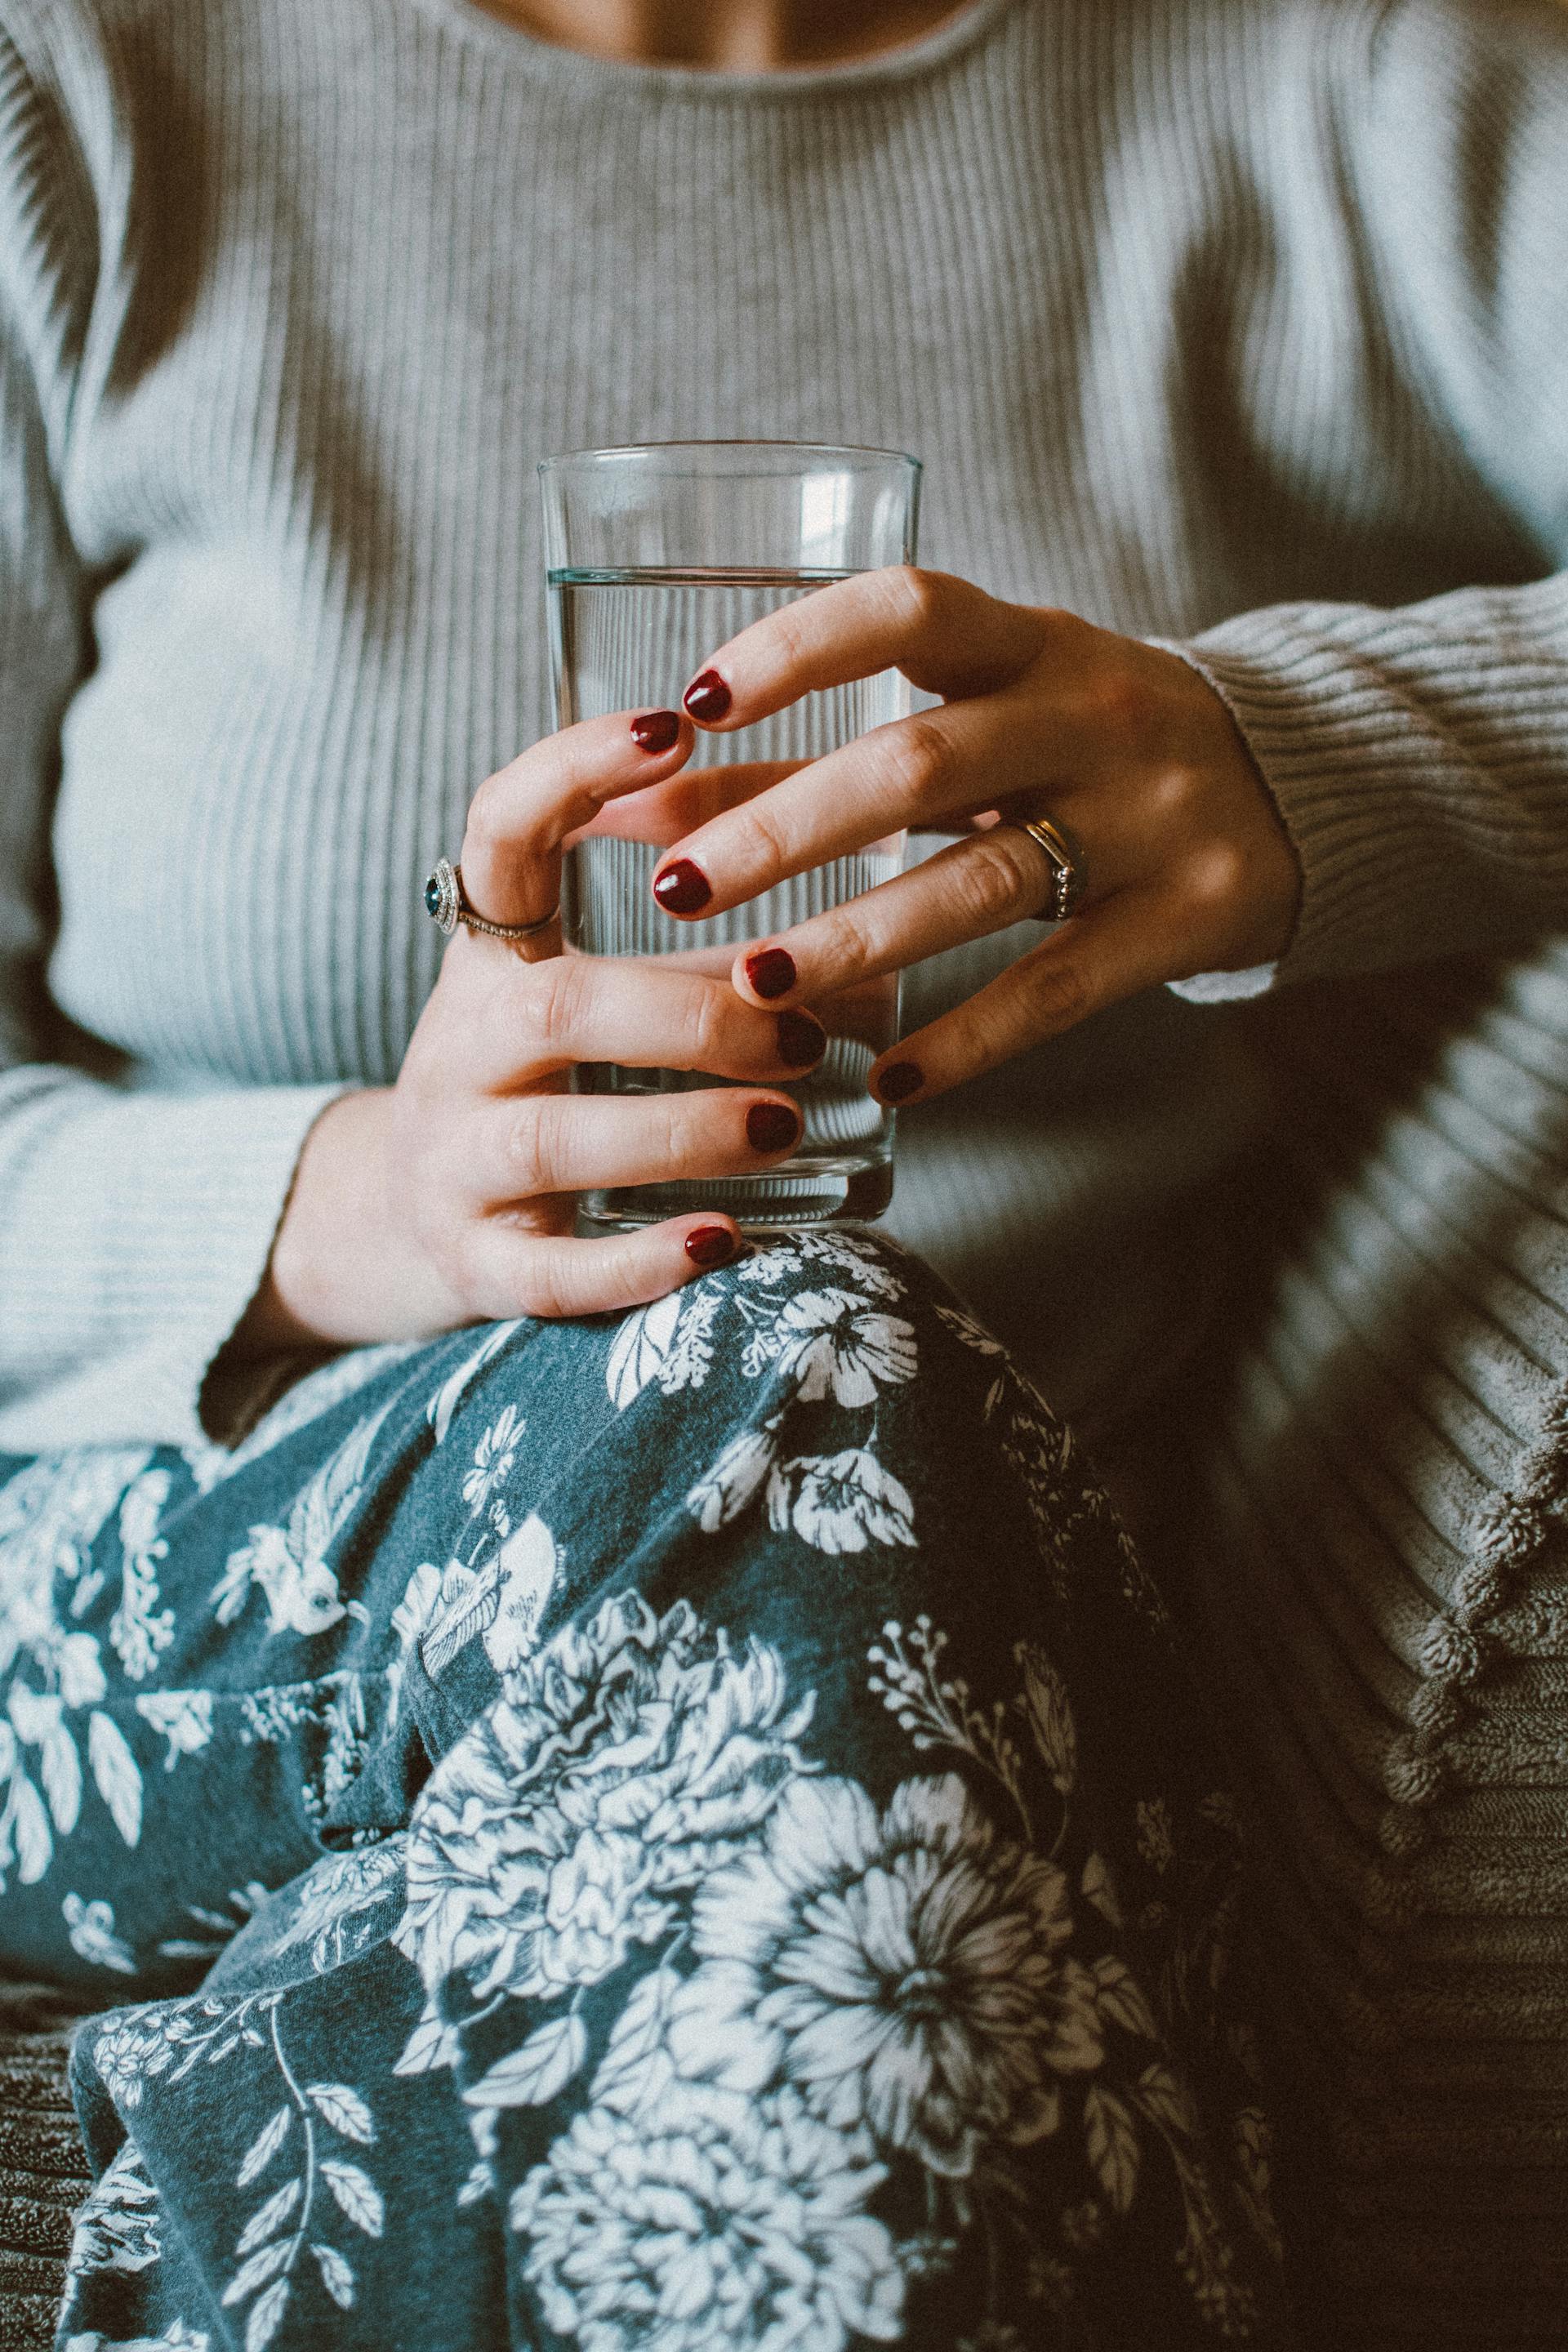 A woman sitting on a sofa while holding a glass of water | Source: Pexels